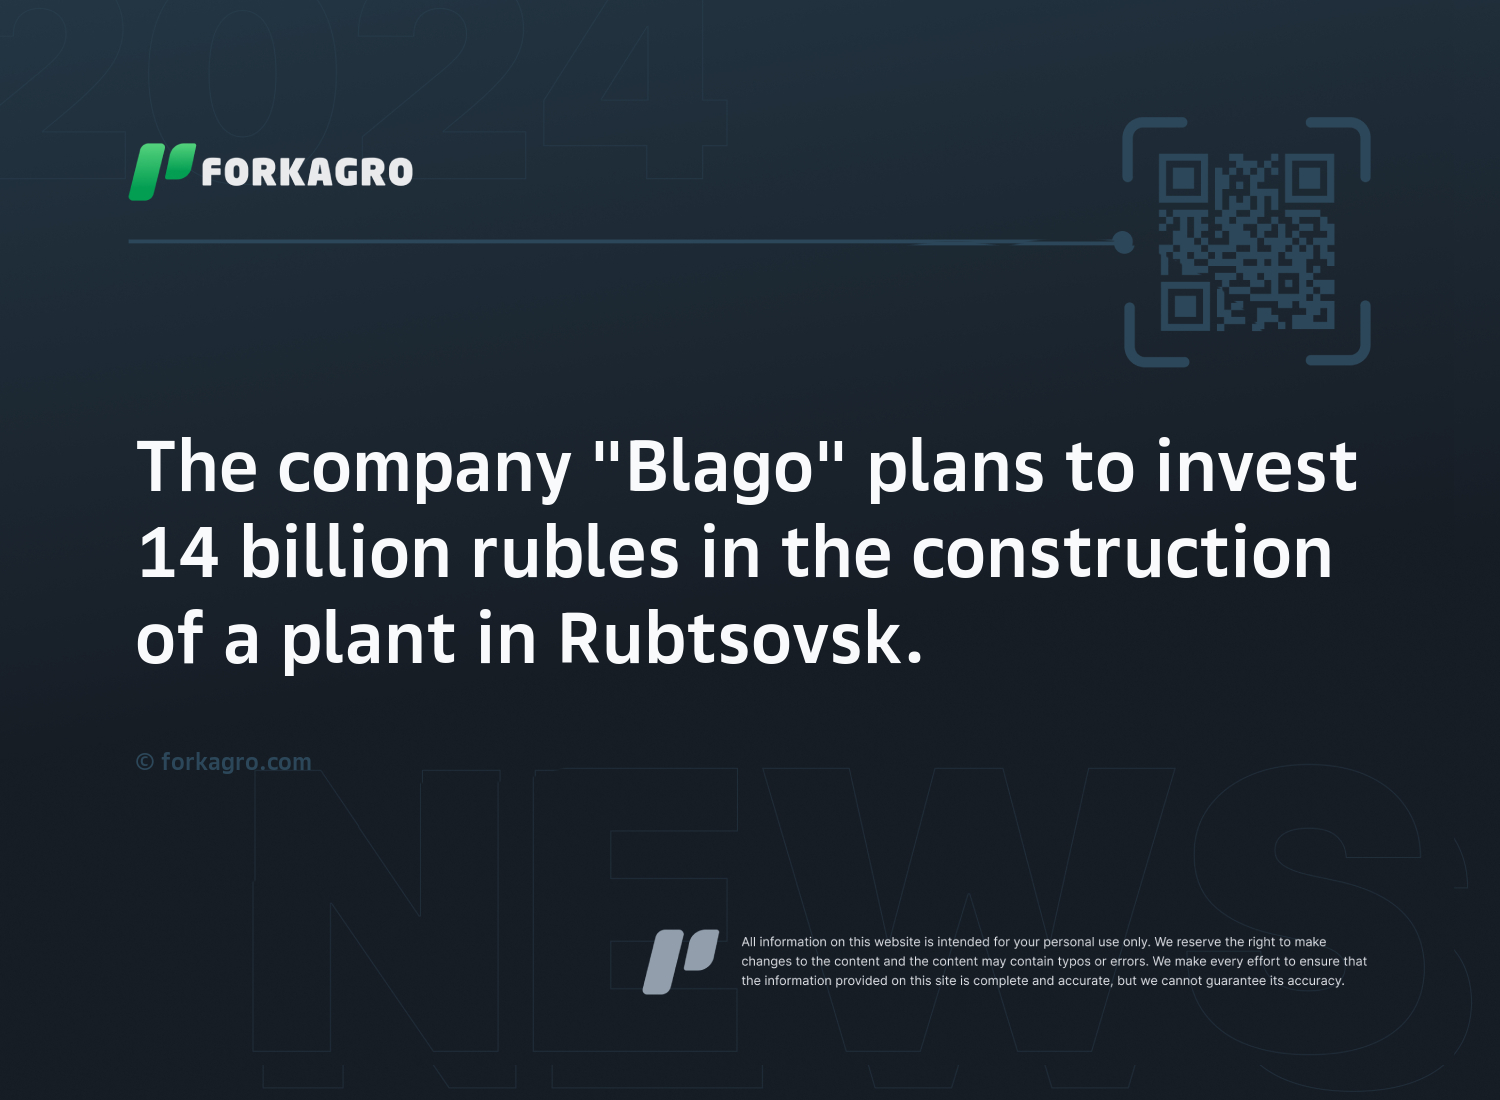 The company "Blago" plans to invest 14 billion rubles in the construction of a plant in Rubtsovsk.